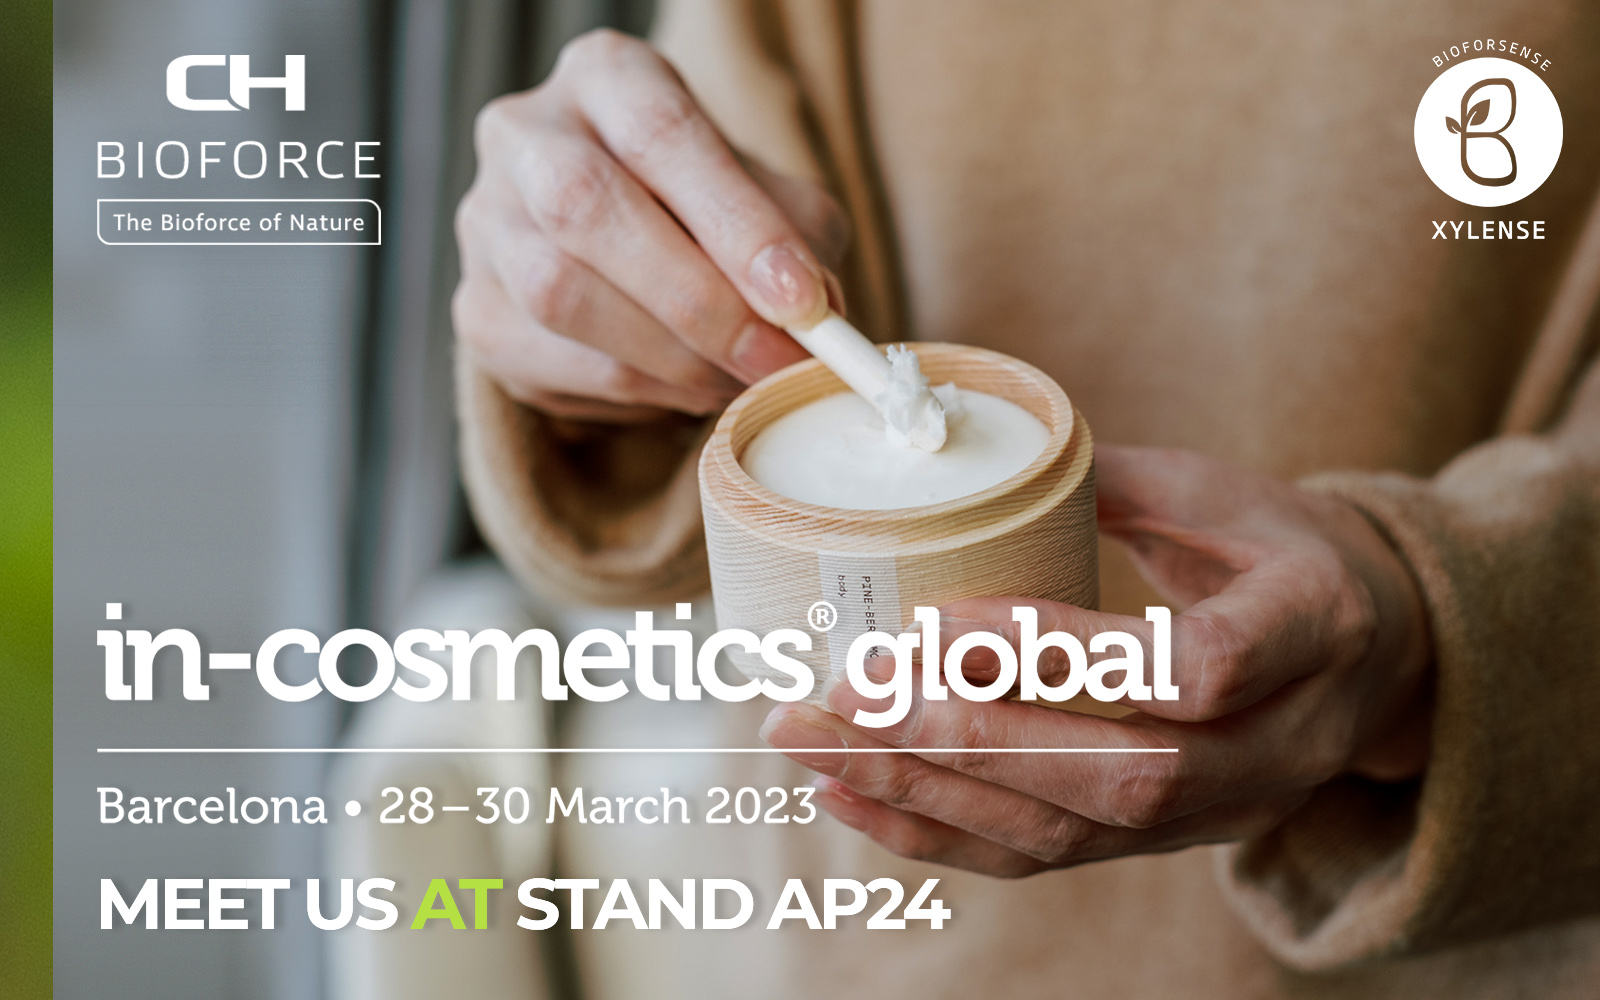 CH-Bioforce is attending in-cosmetics Global 2023